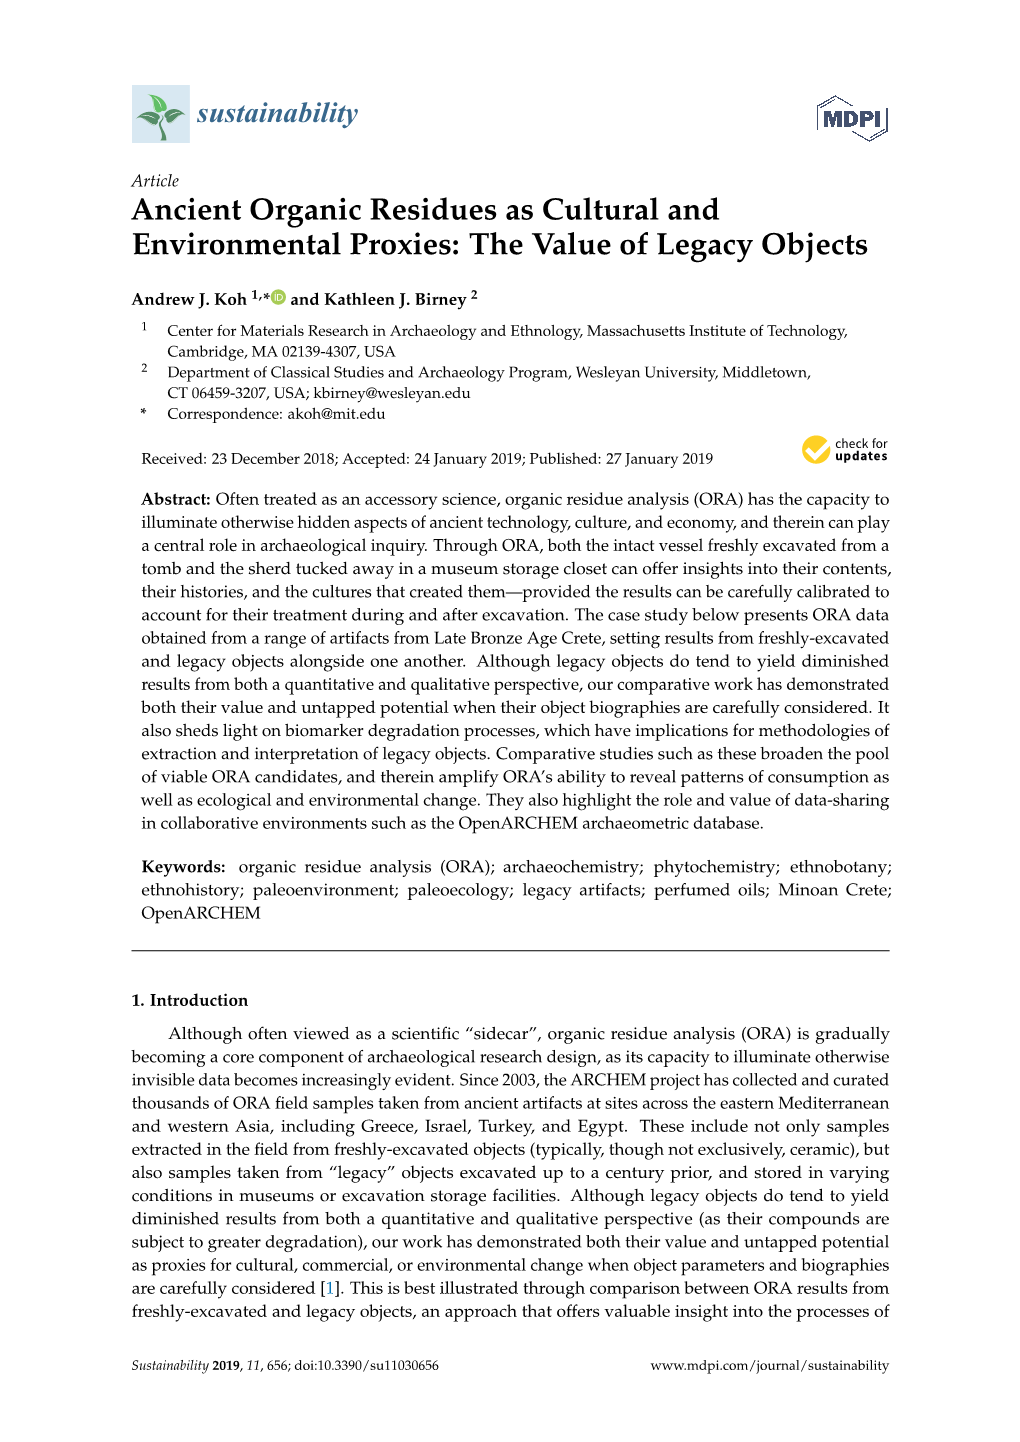 Ancient Organic Residues As Cultural and Environmental Proxies: the Value of Legacy Objects